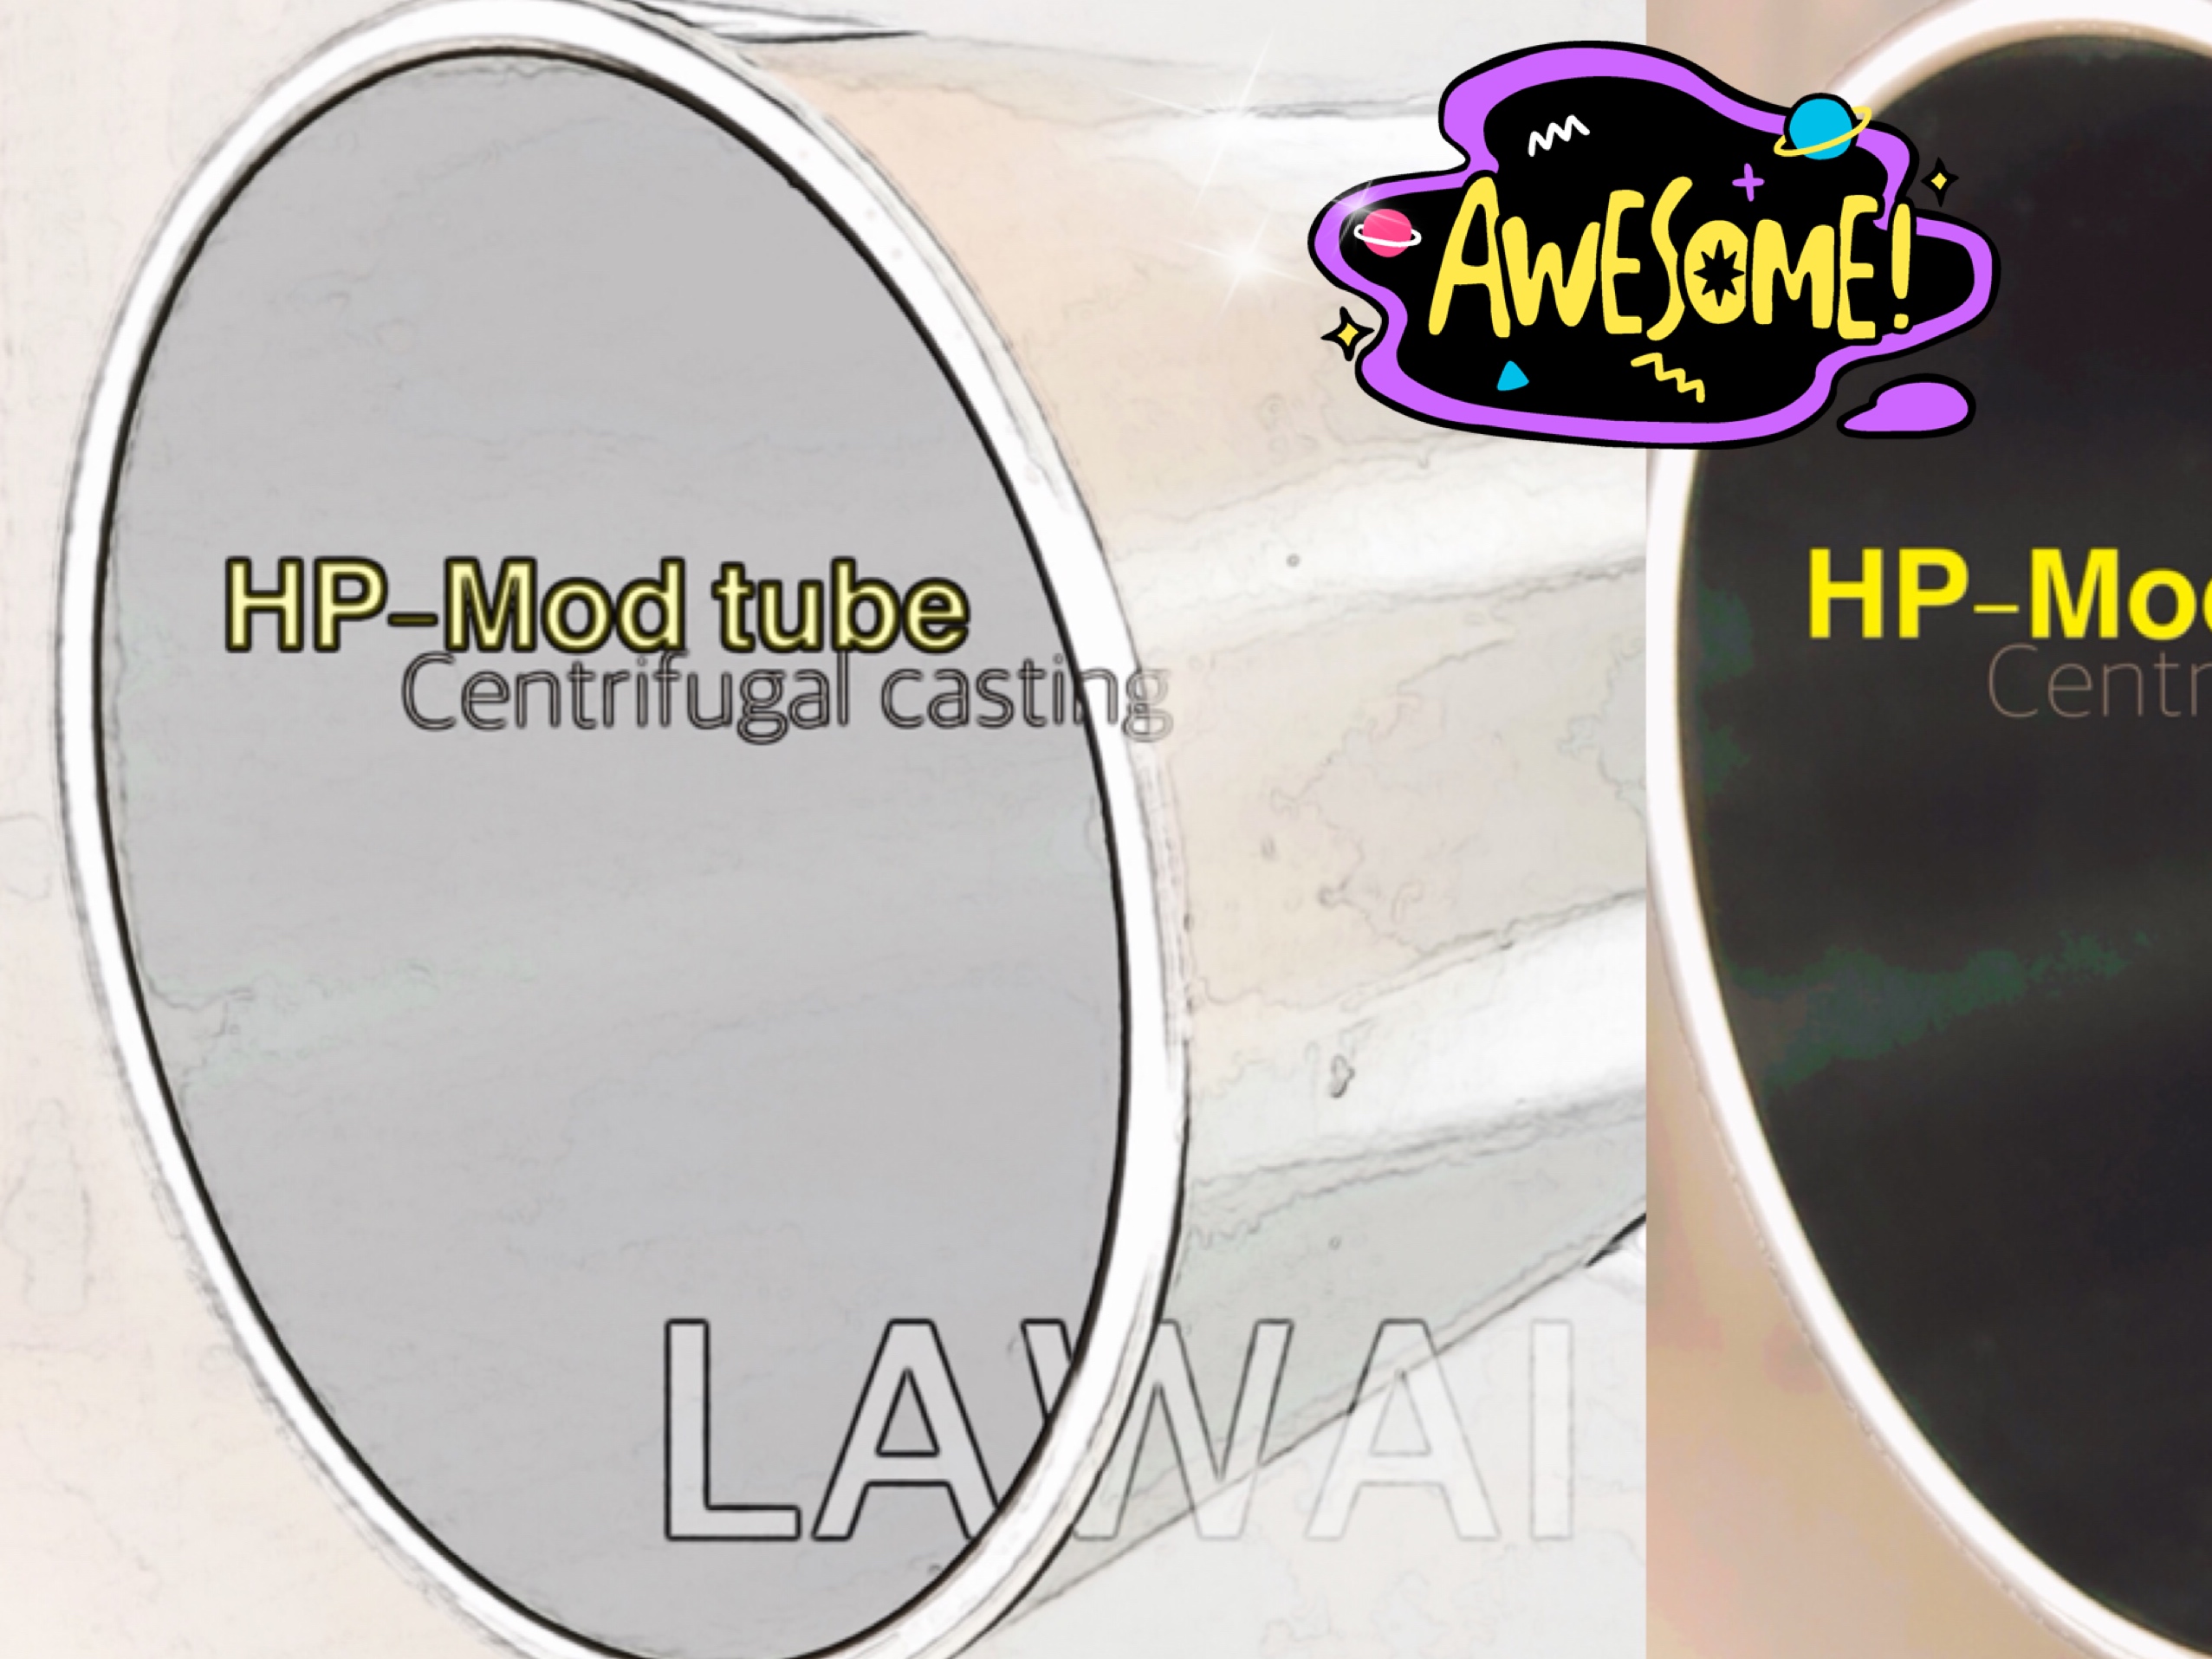 HP-Mod tube is manufactured by centrifugal casting technique at LAWAI INDUSTRIAL CORPORATION